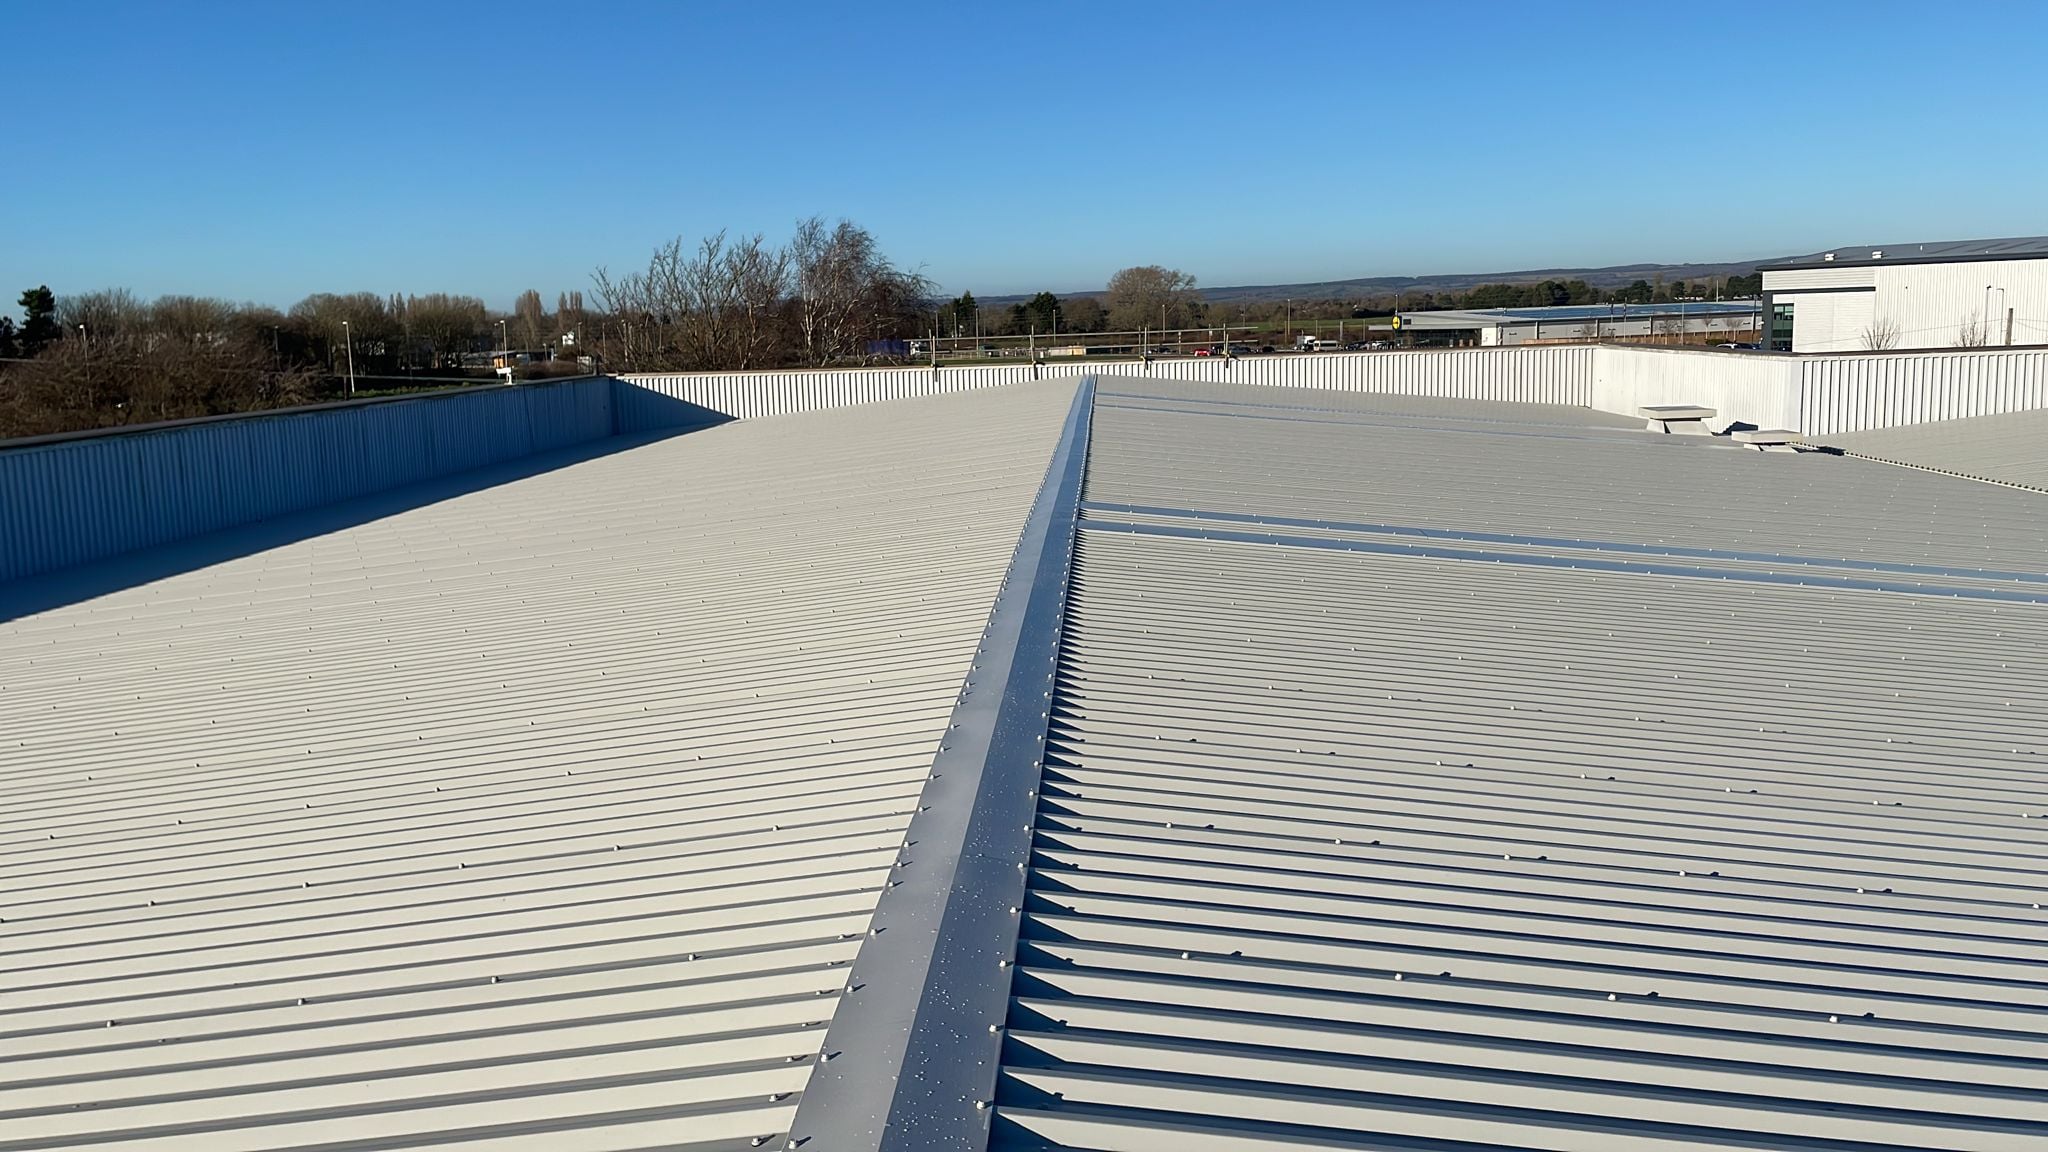 Over-roofing project to an office and workshop roof in Bognor Regis, West Sussex